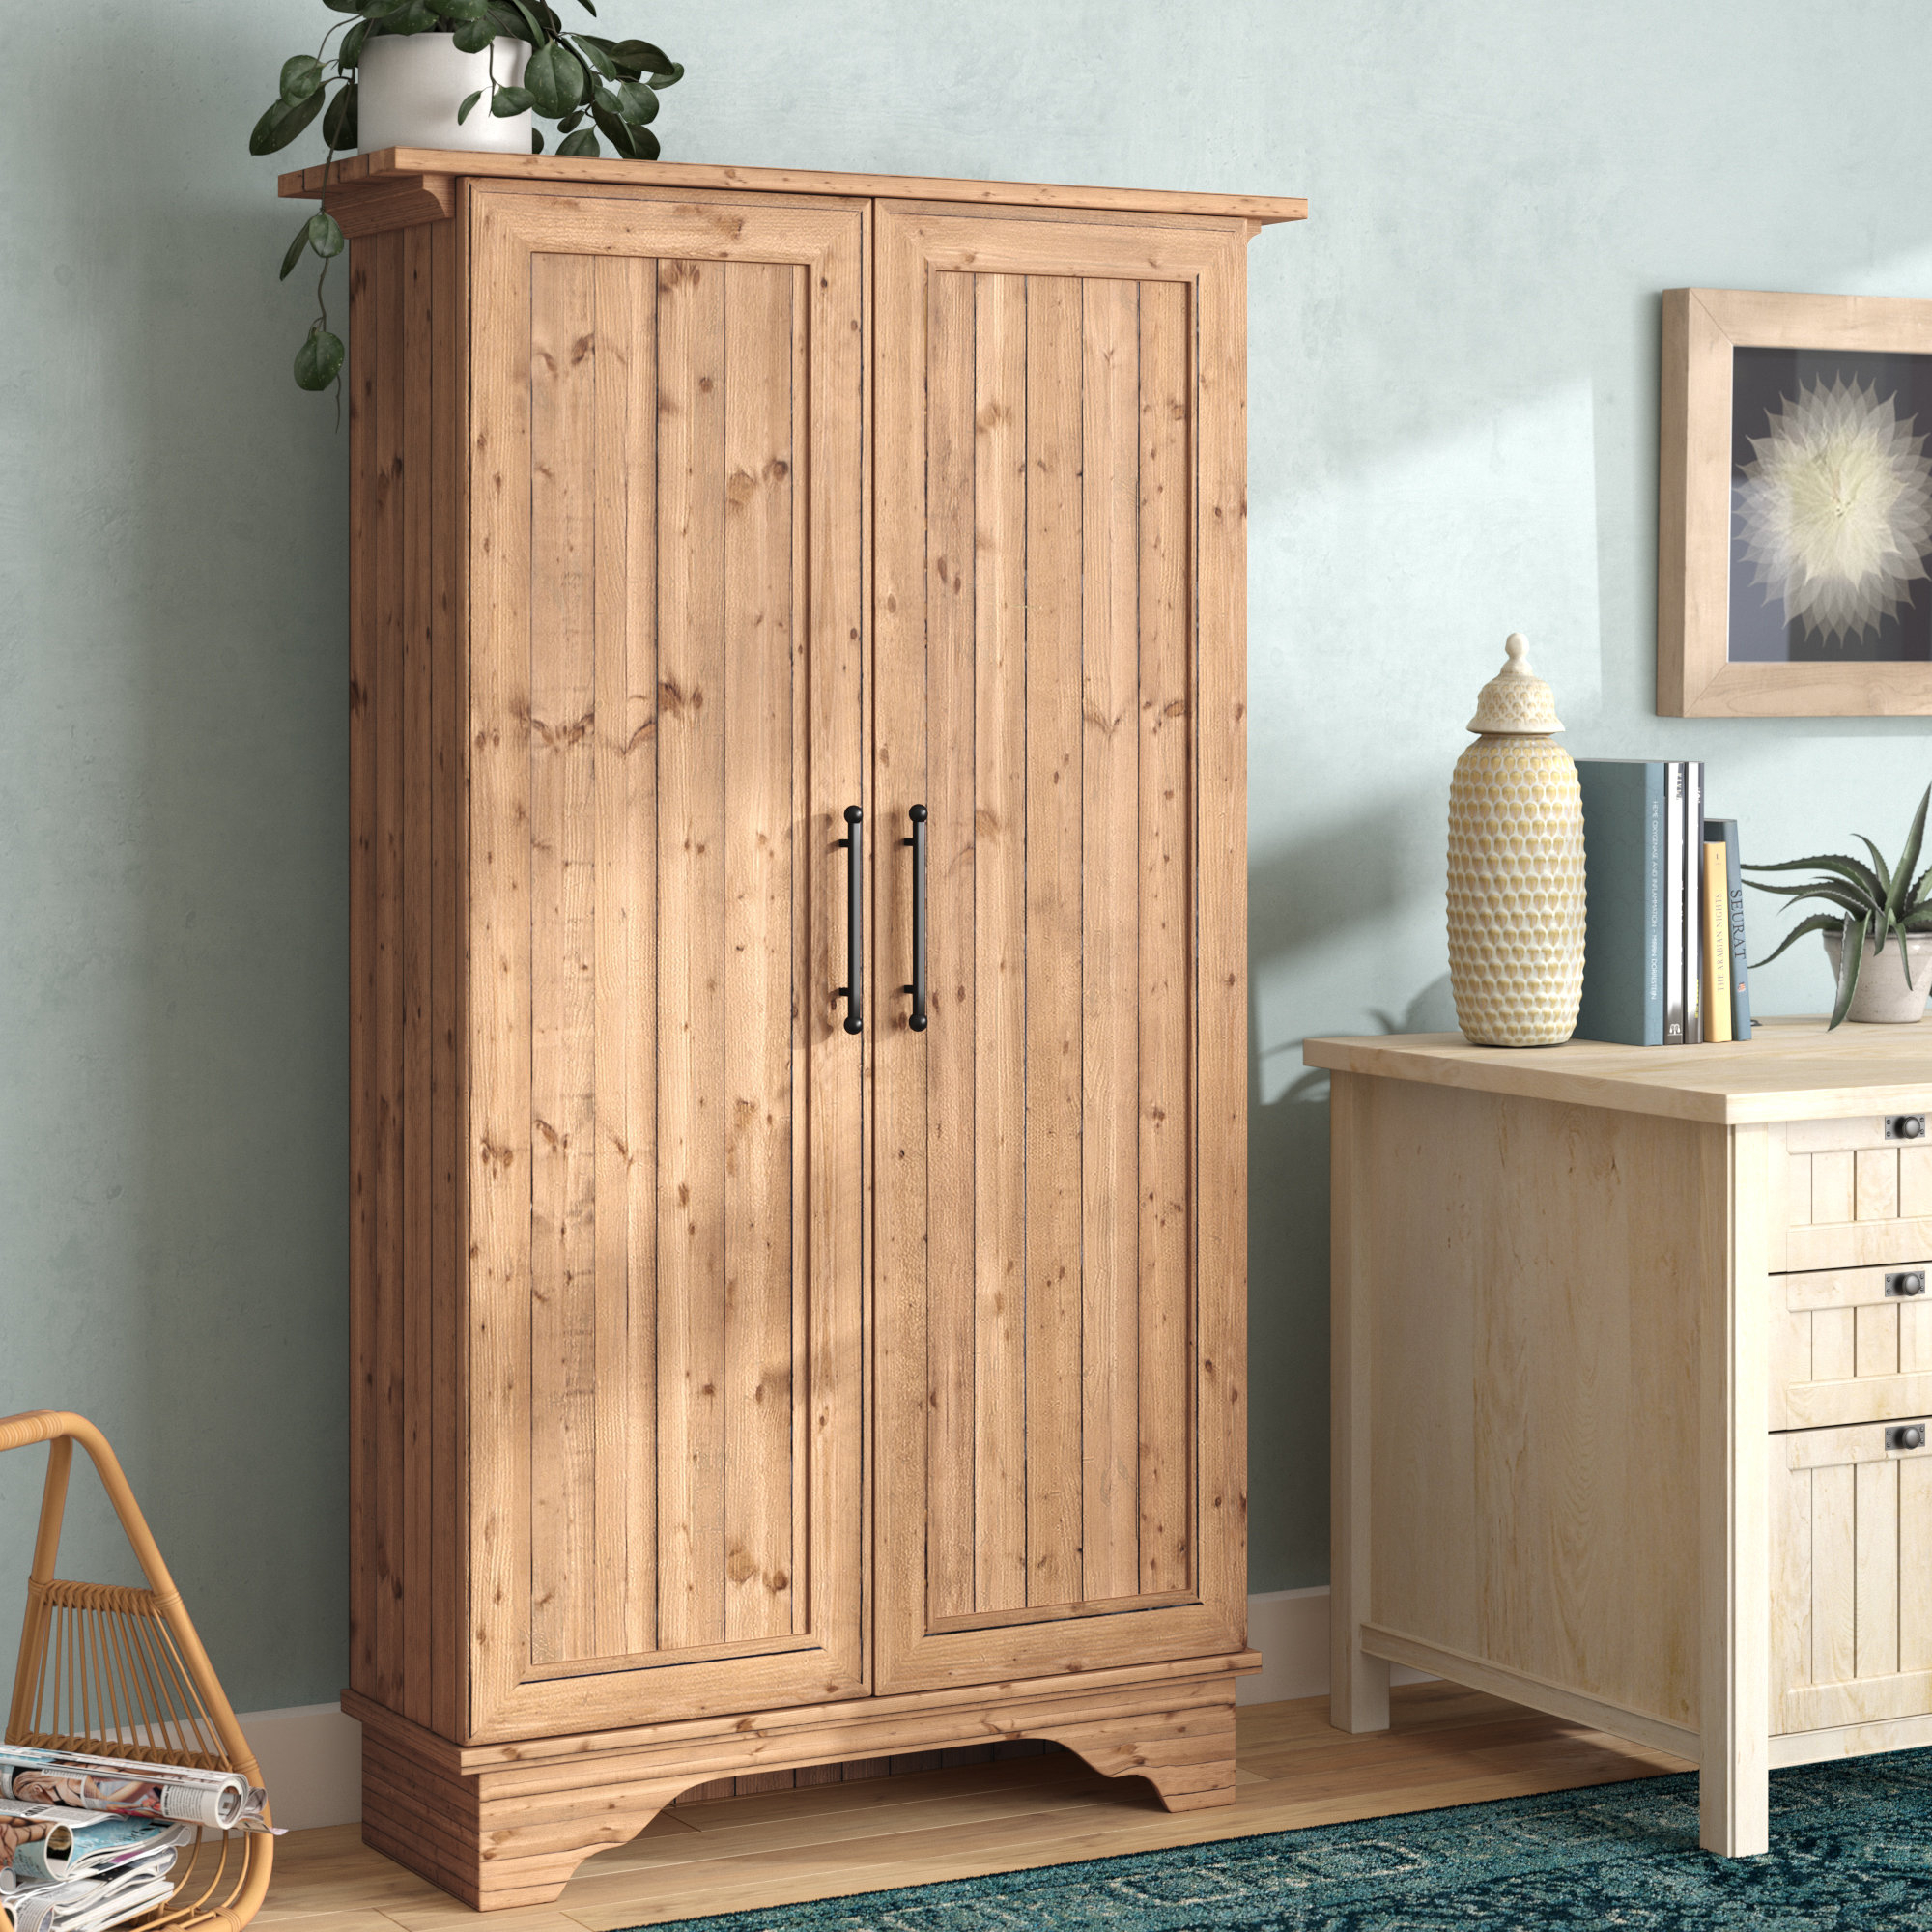 Tall Wood Storage Cabinets With Doors, Tall Wooden Cabinets With Shelves